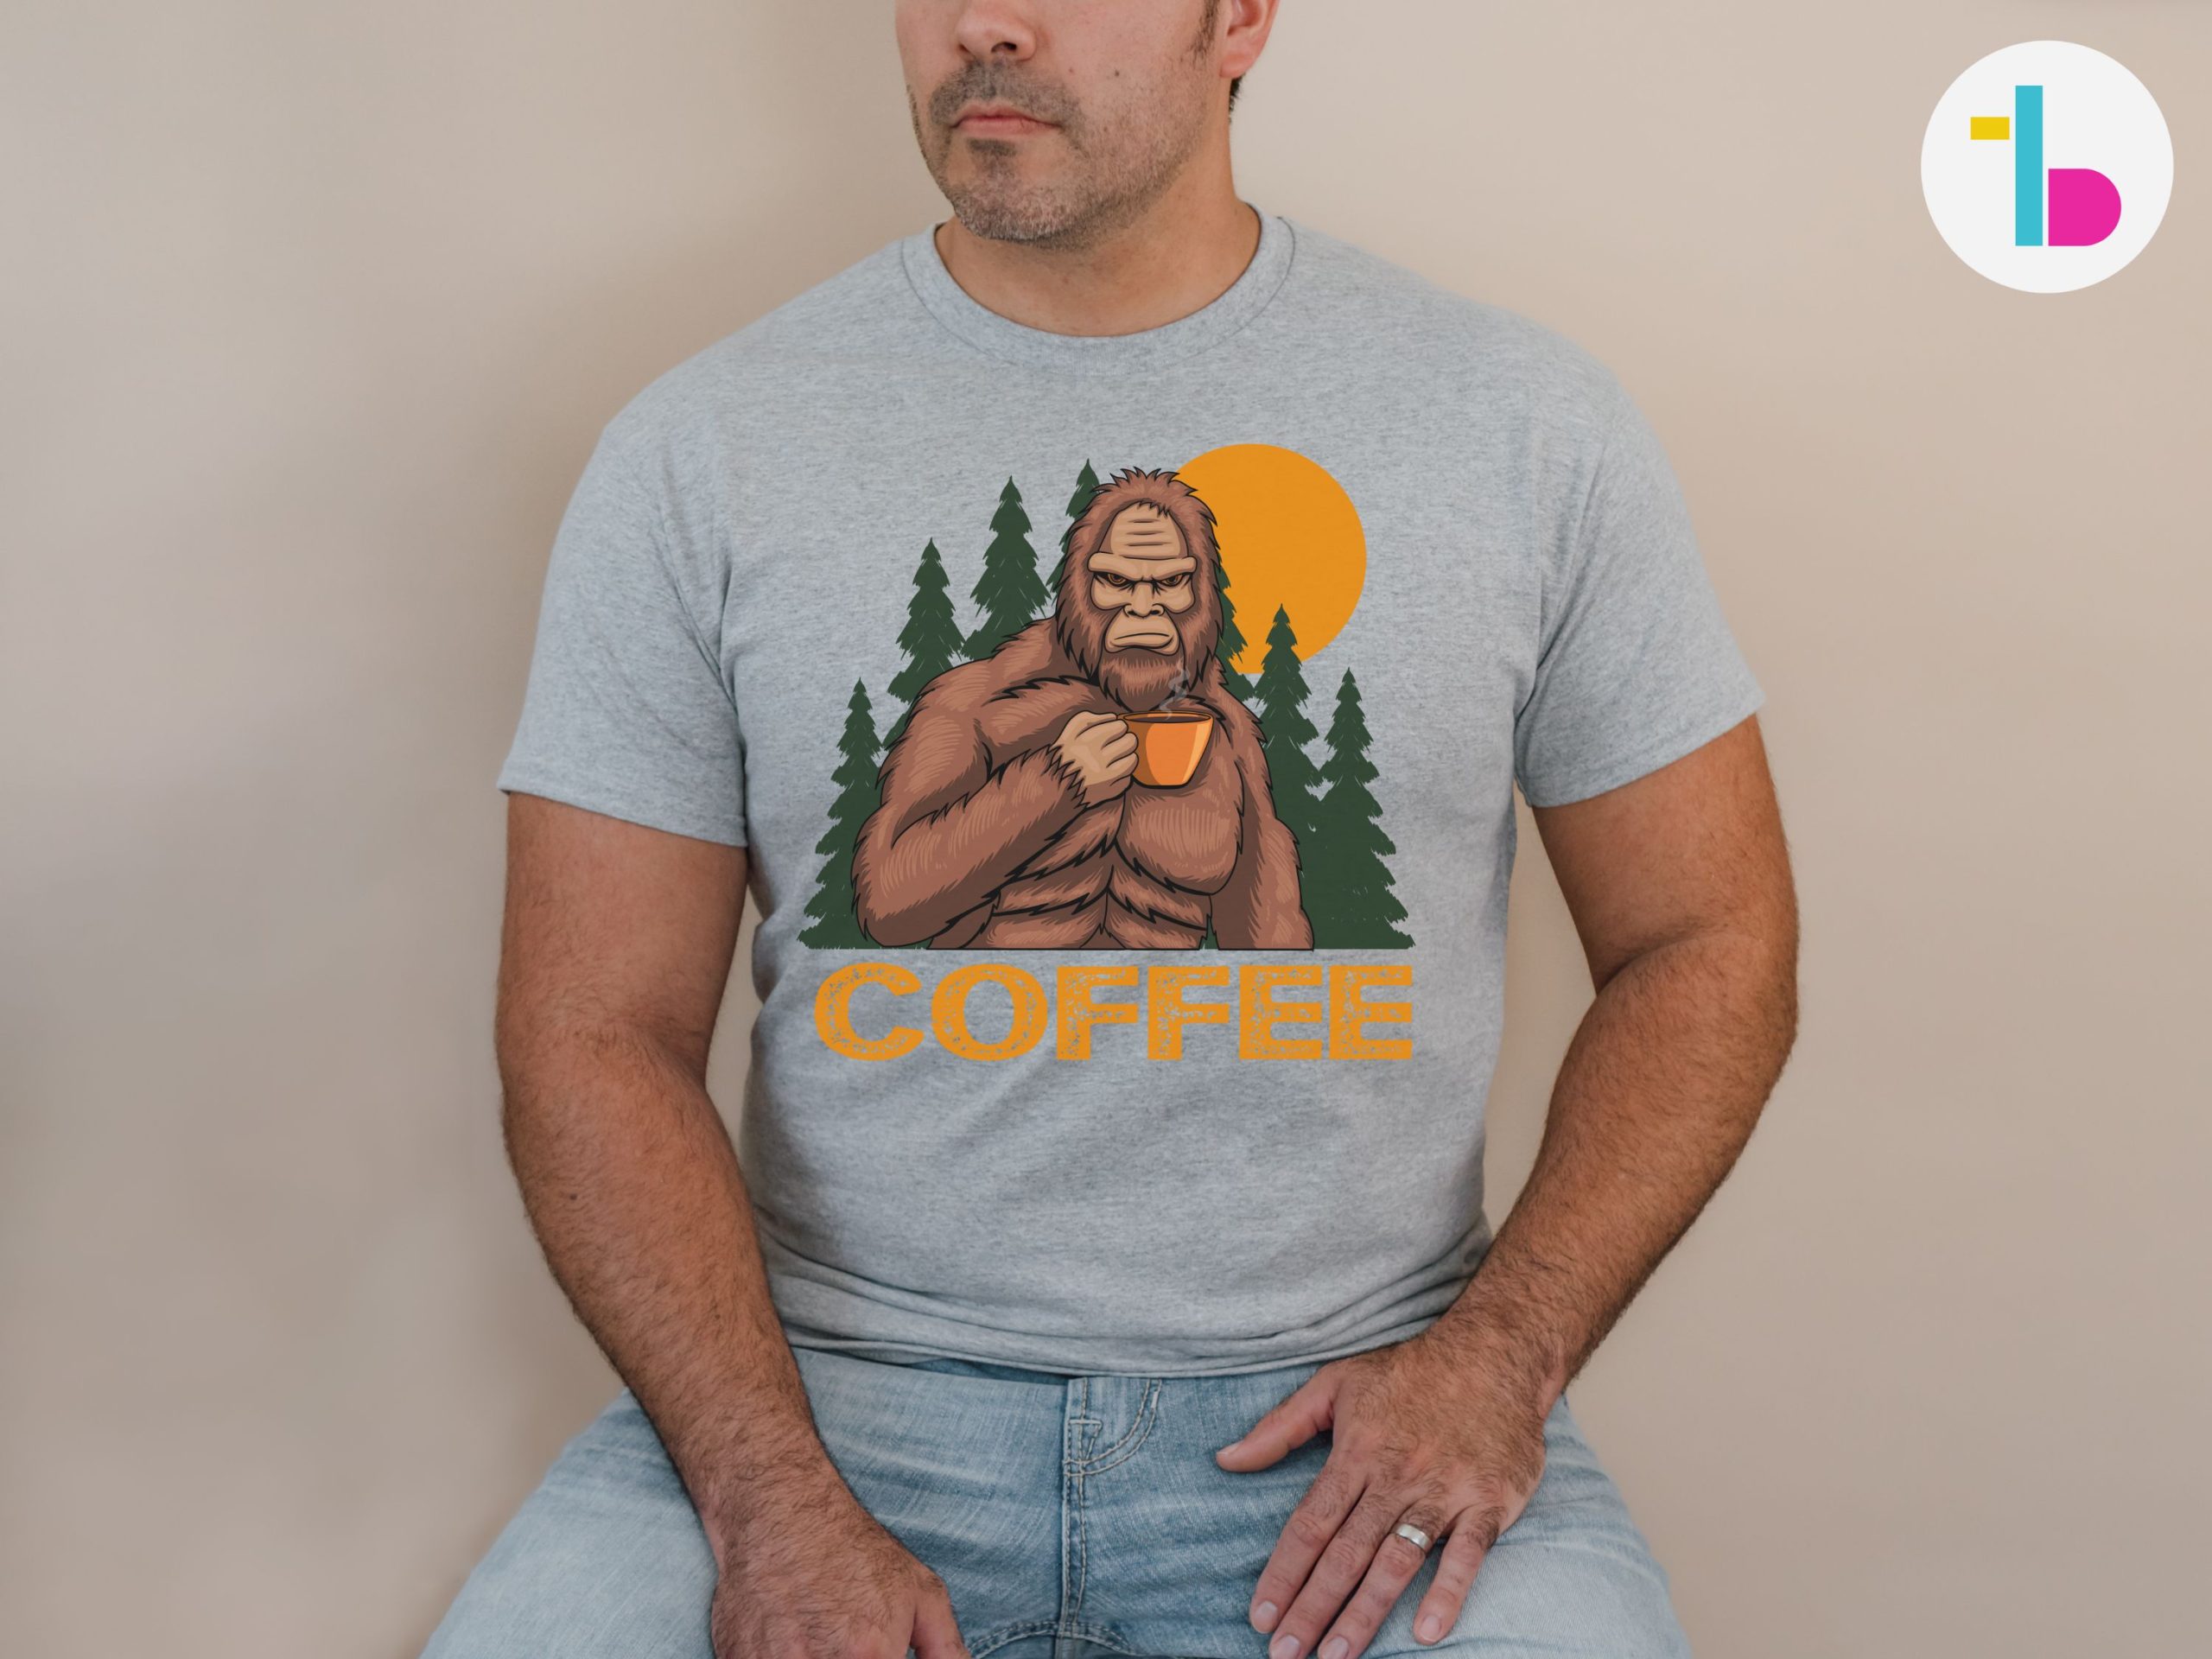 Bigfoot chilling and drinking coffee shirt, Coffee lover gift